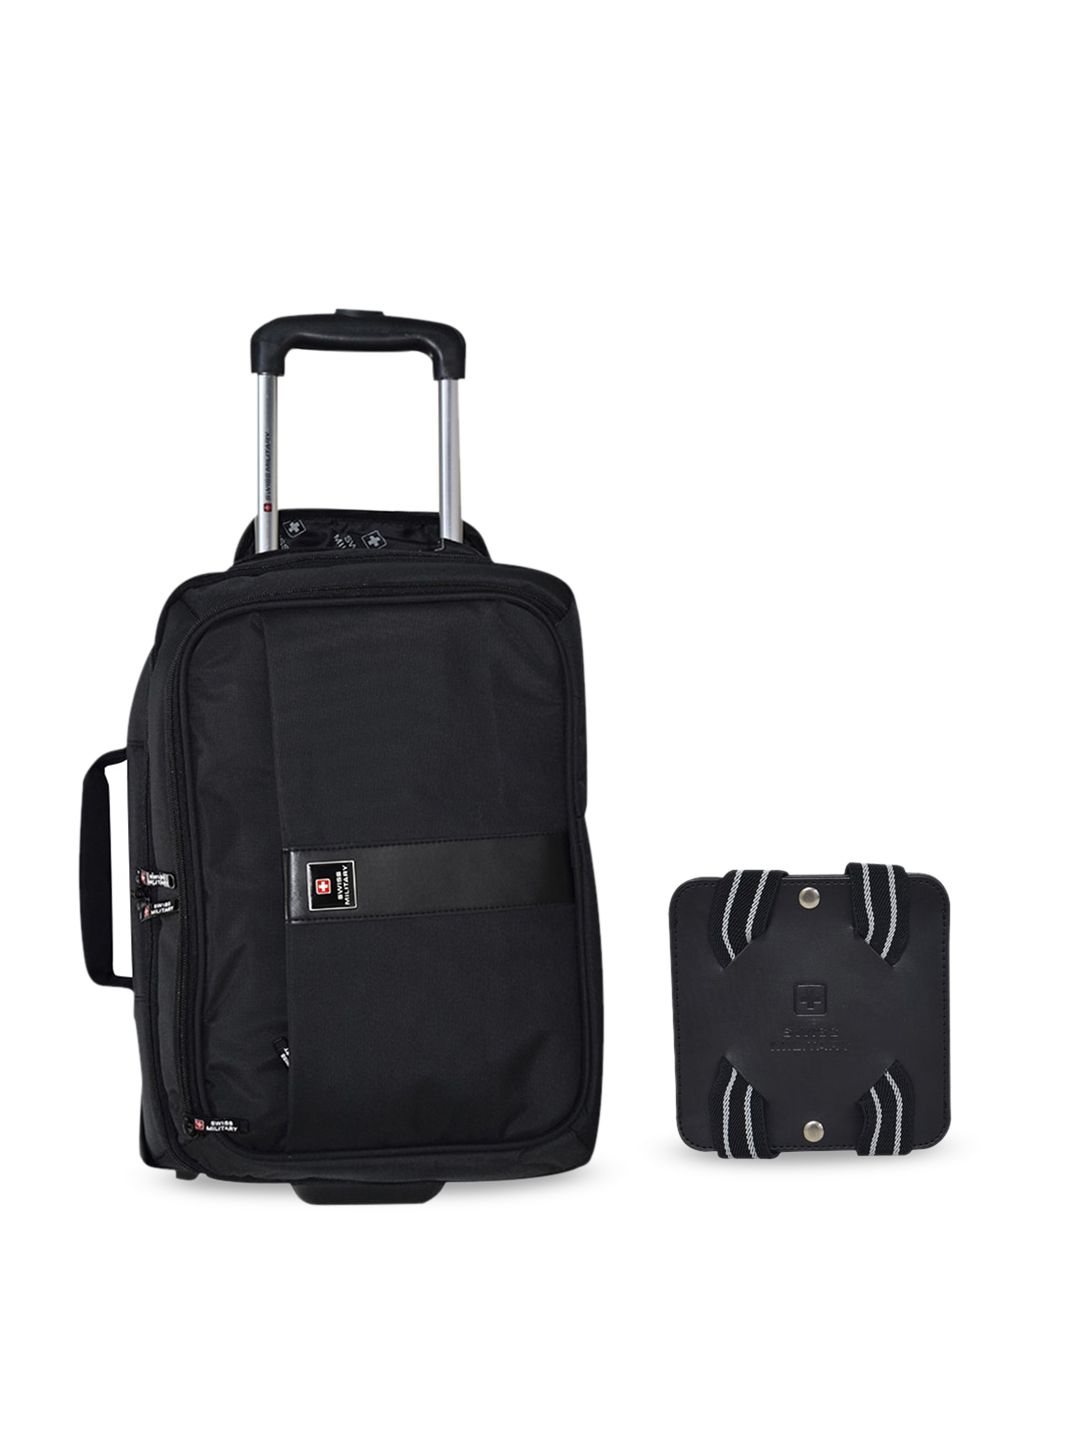 SWISS MILITARY Black Laptop Brief Case Backpack & Travel Luggage Belt Price in India